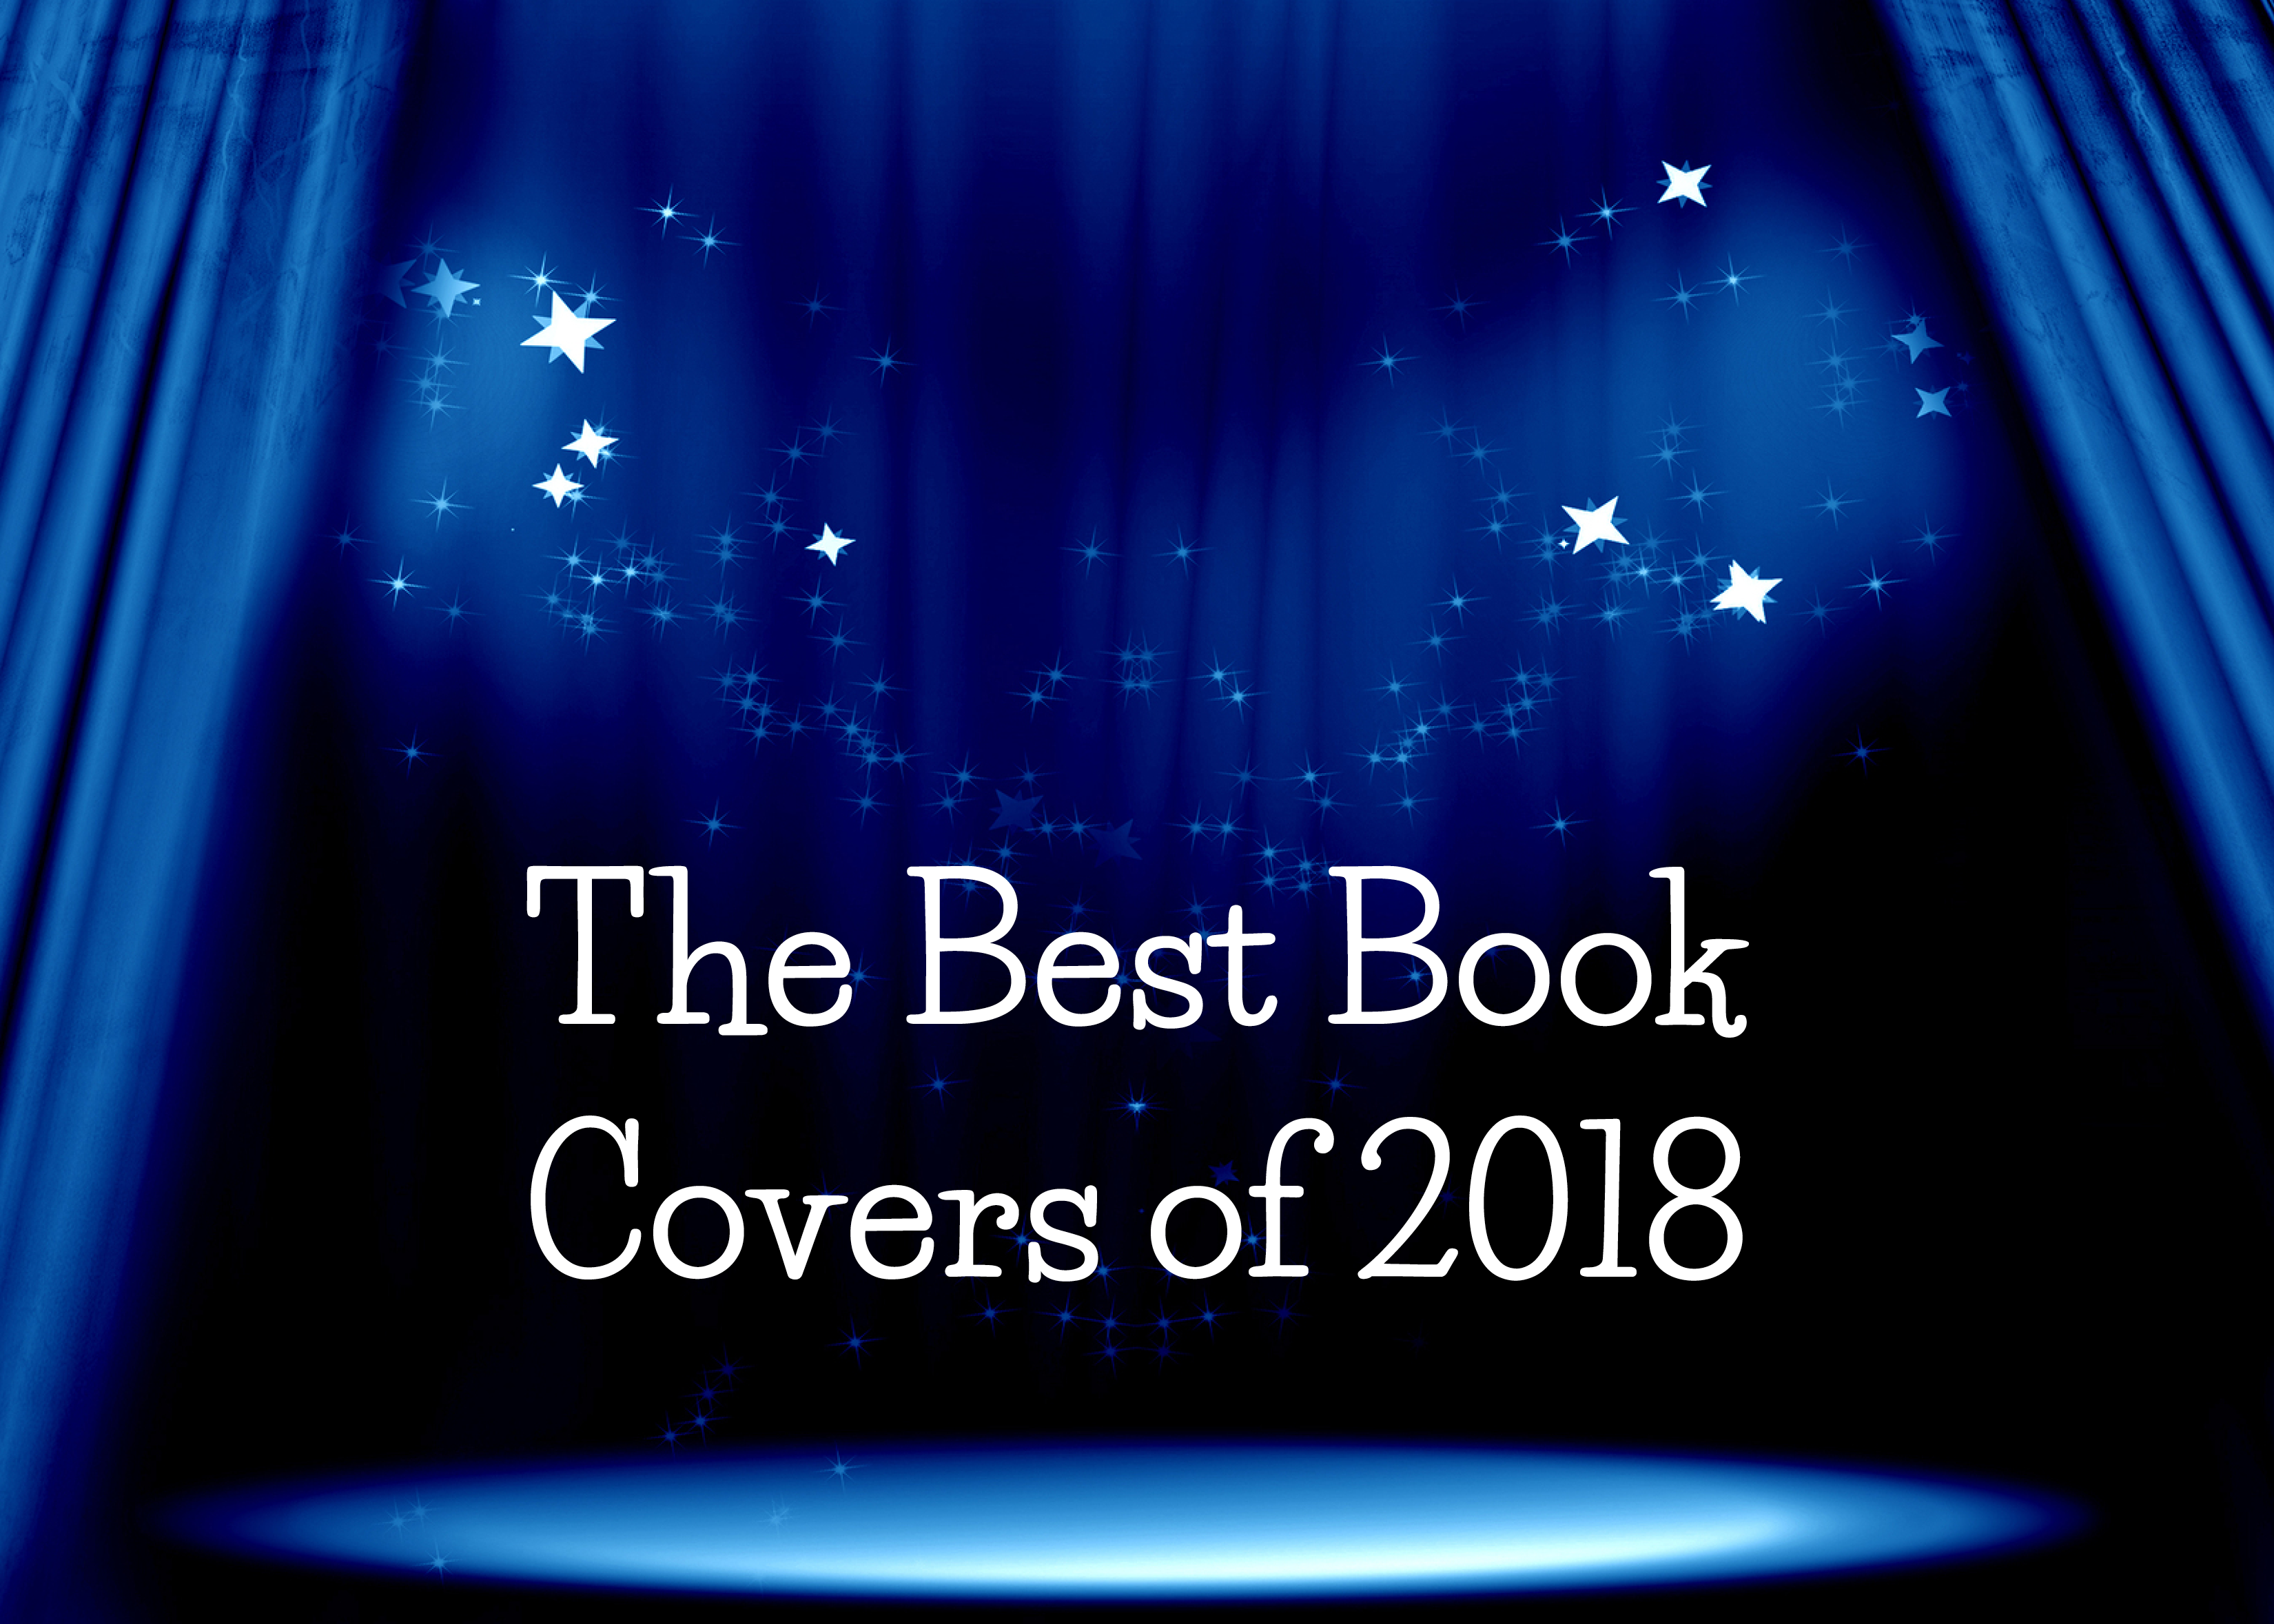 The Best Book Covers of 2018